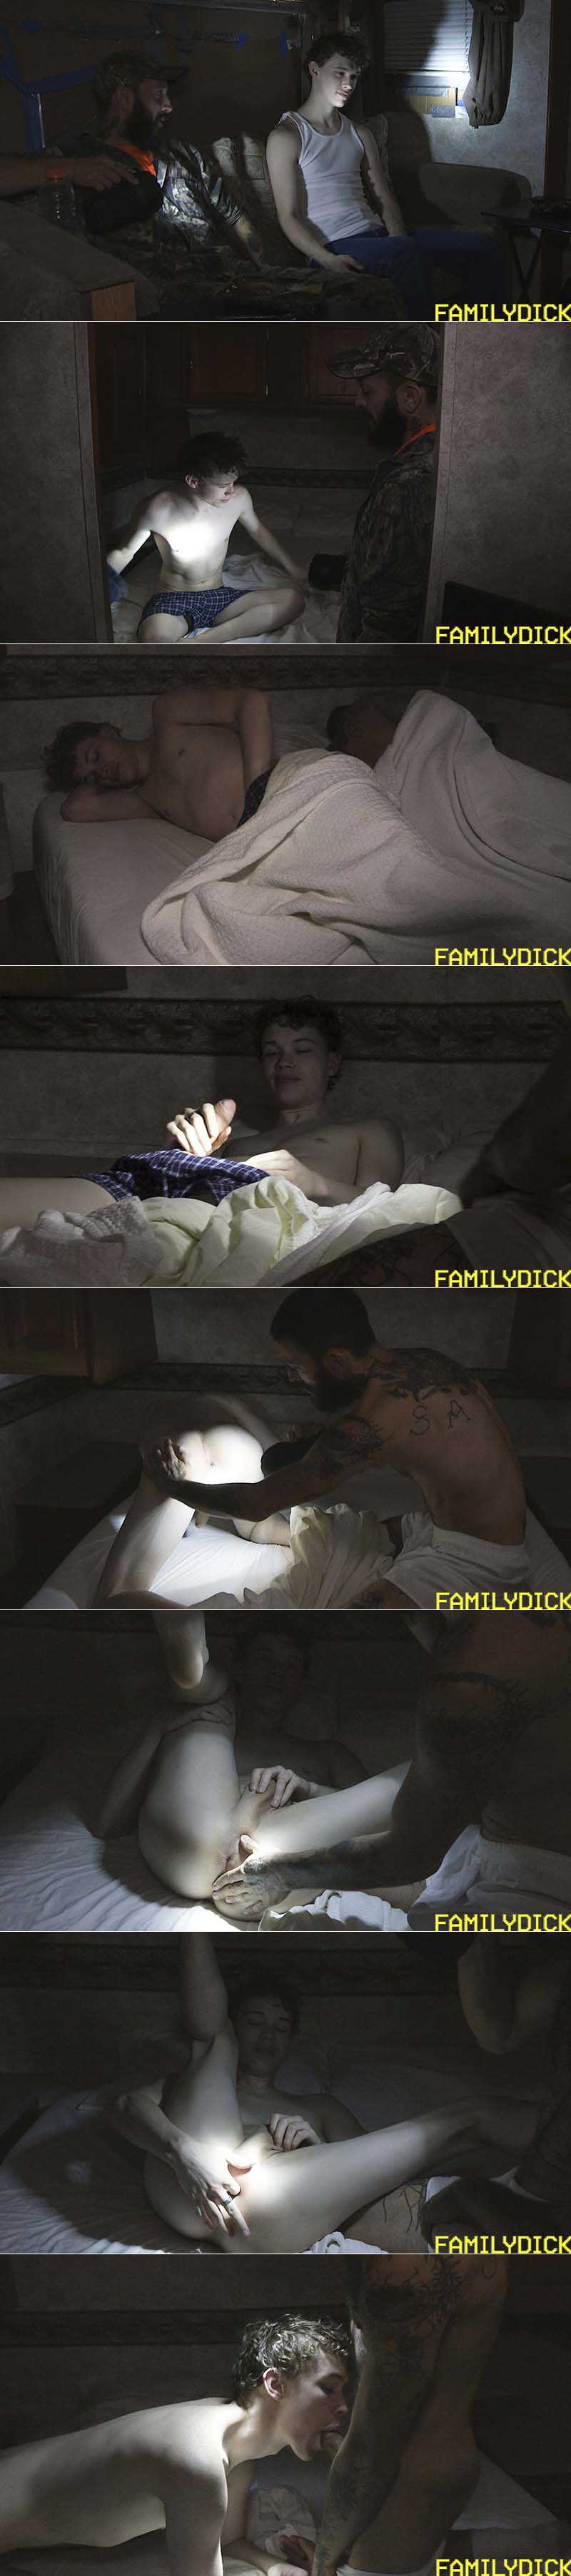 Raised In A Trailer, Chapter 3: LIGHTS OUT (with Matt Muck and Toby Muck) at FamilyDick